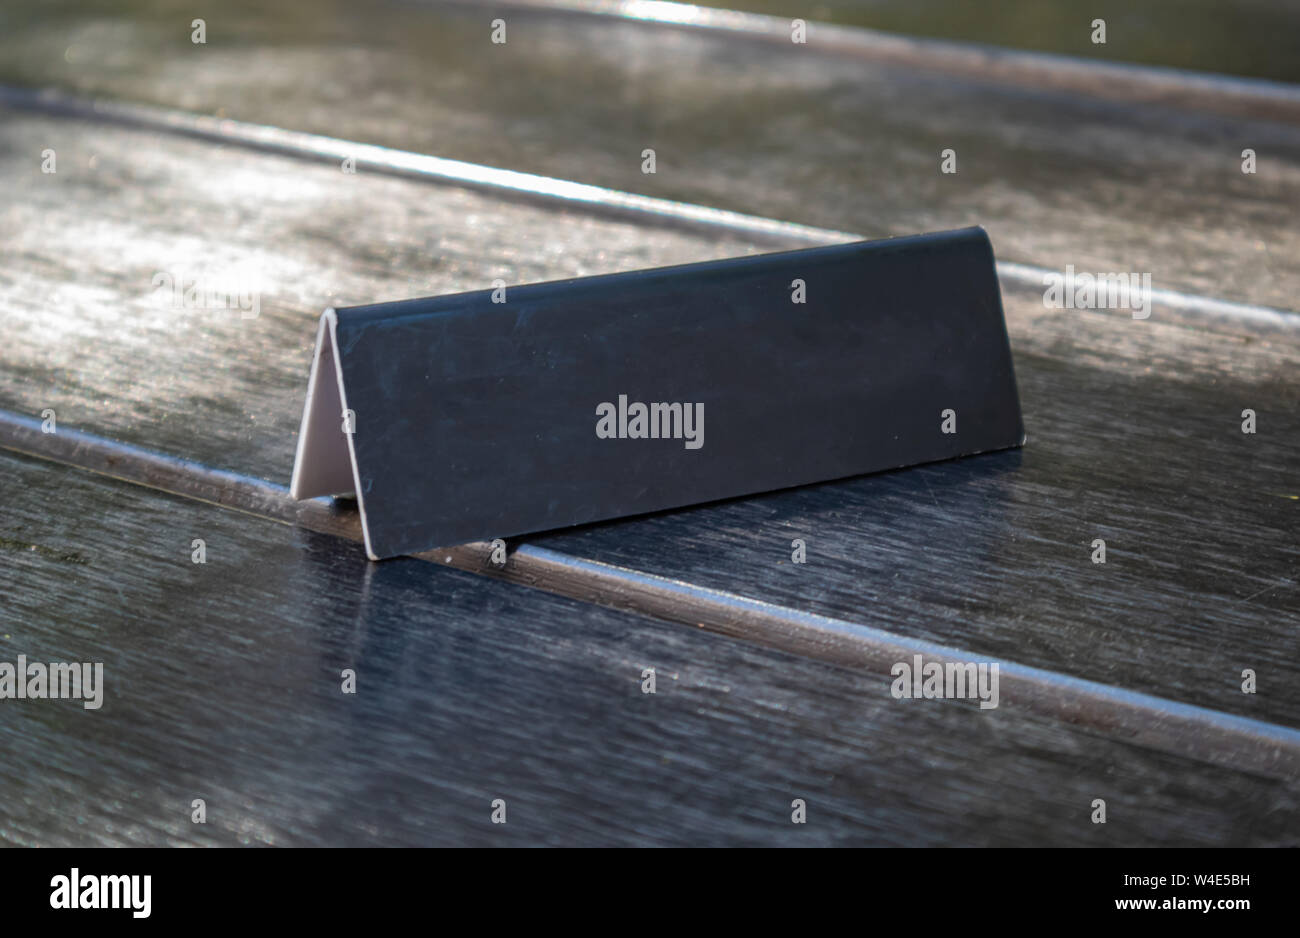 Download Blank Reserved Sign Reservation Concept Metal Black Color Plate Mockup Template On Wooden Table Copy Space Close Up View With Details Stock Photo Alamy